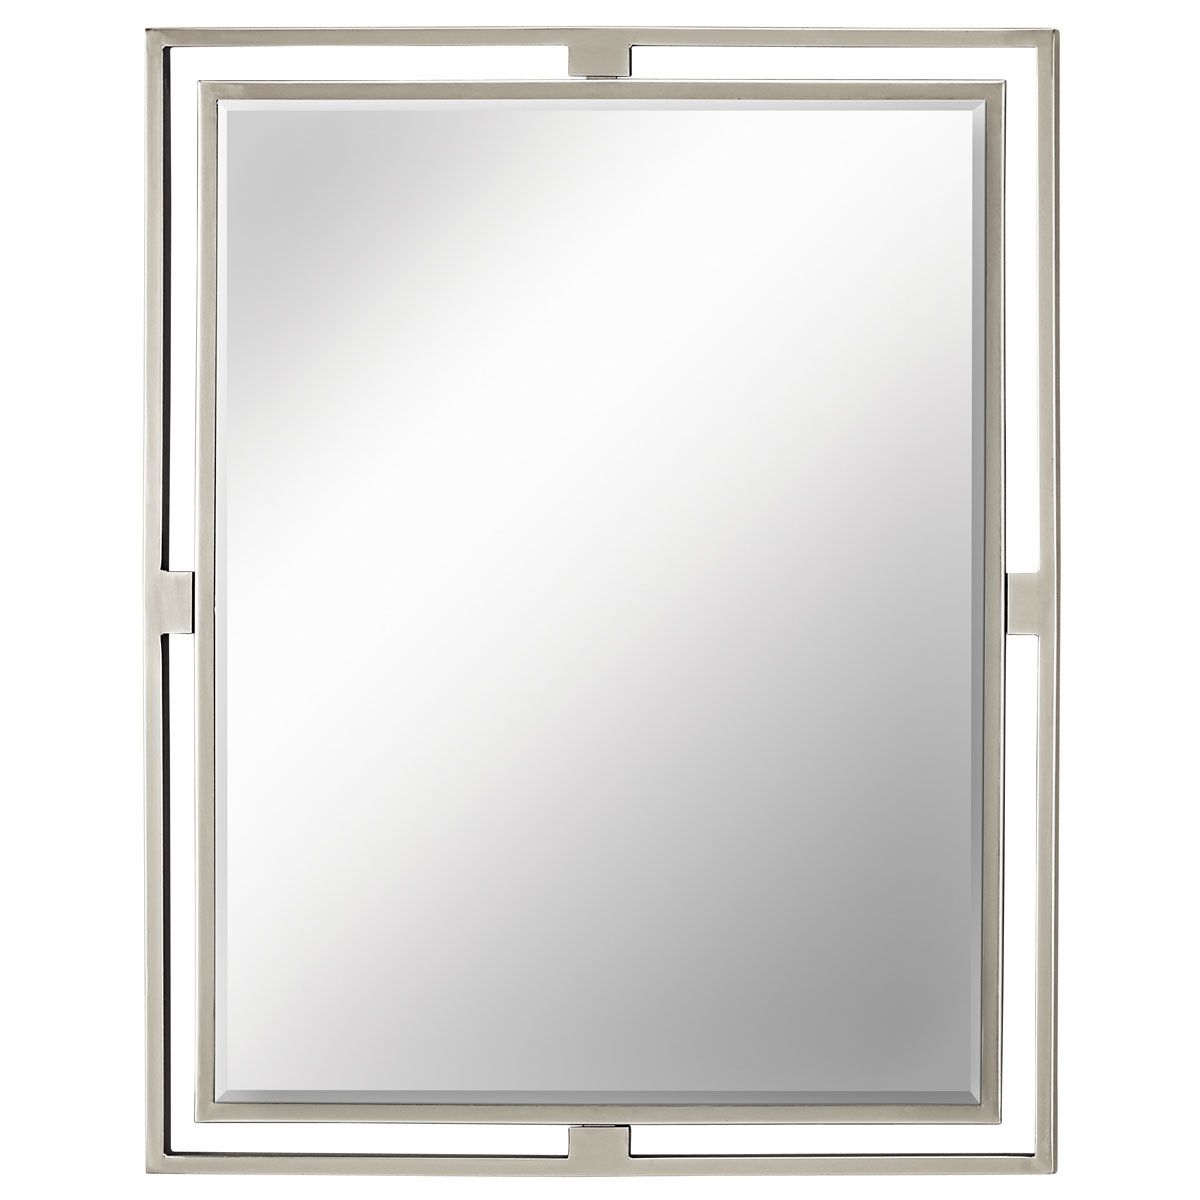 Most Popular Kichler 41071 Brushed Nickel Hendrik Rectangle Beveled Framed Mirror Pertaining To Oxidized Nickel Wall Mirrors (View 2 of 15)